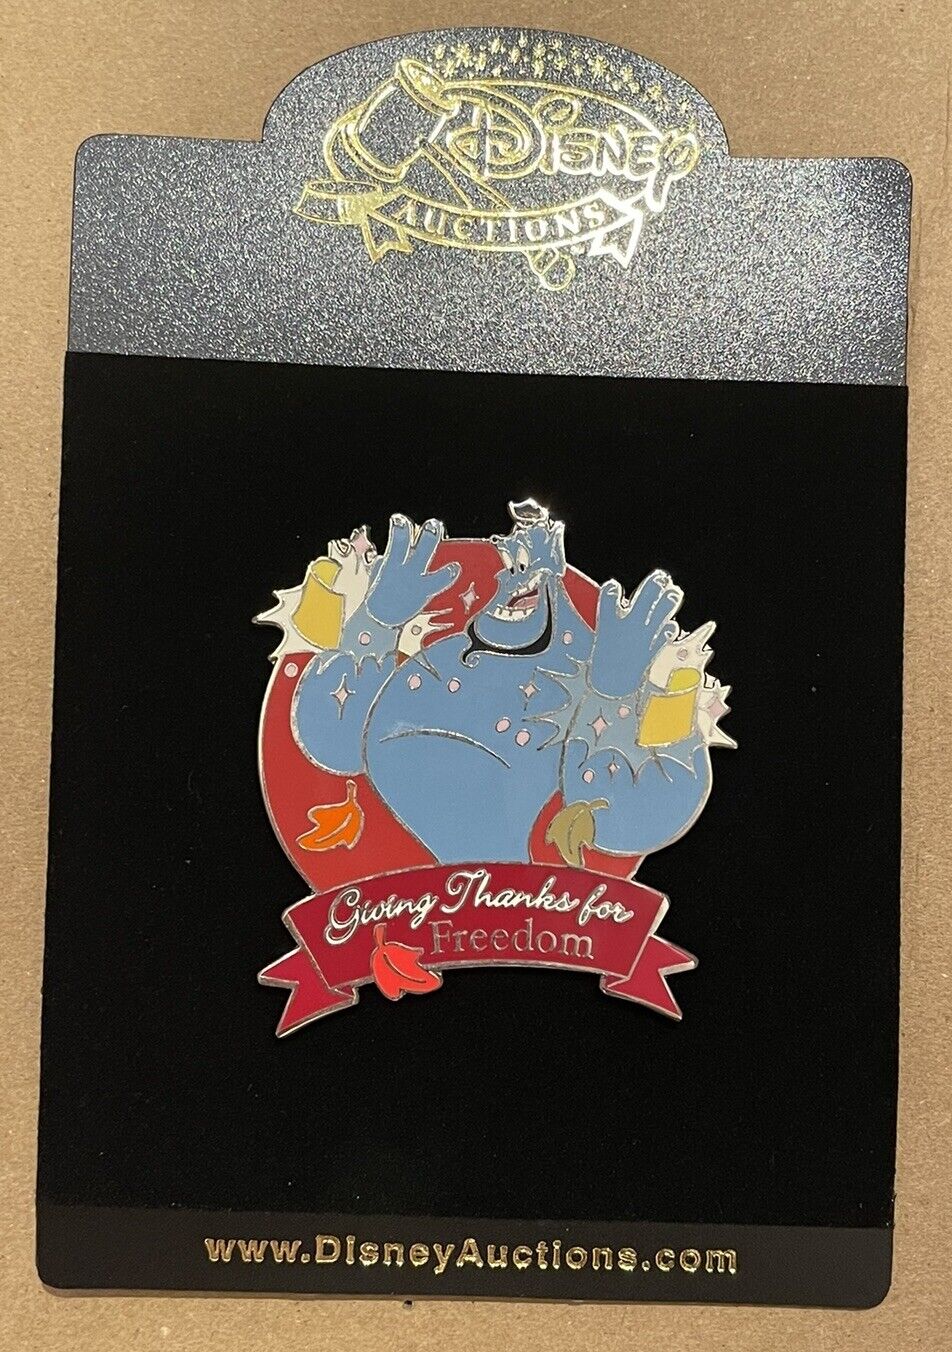 Disney Auctions Aladdin Genie Pin Giving Thanks For Friends LE 100